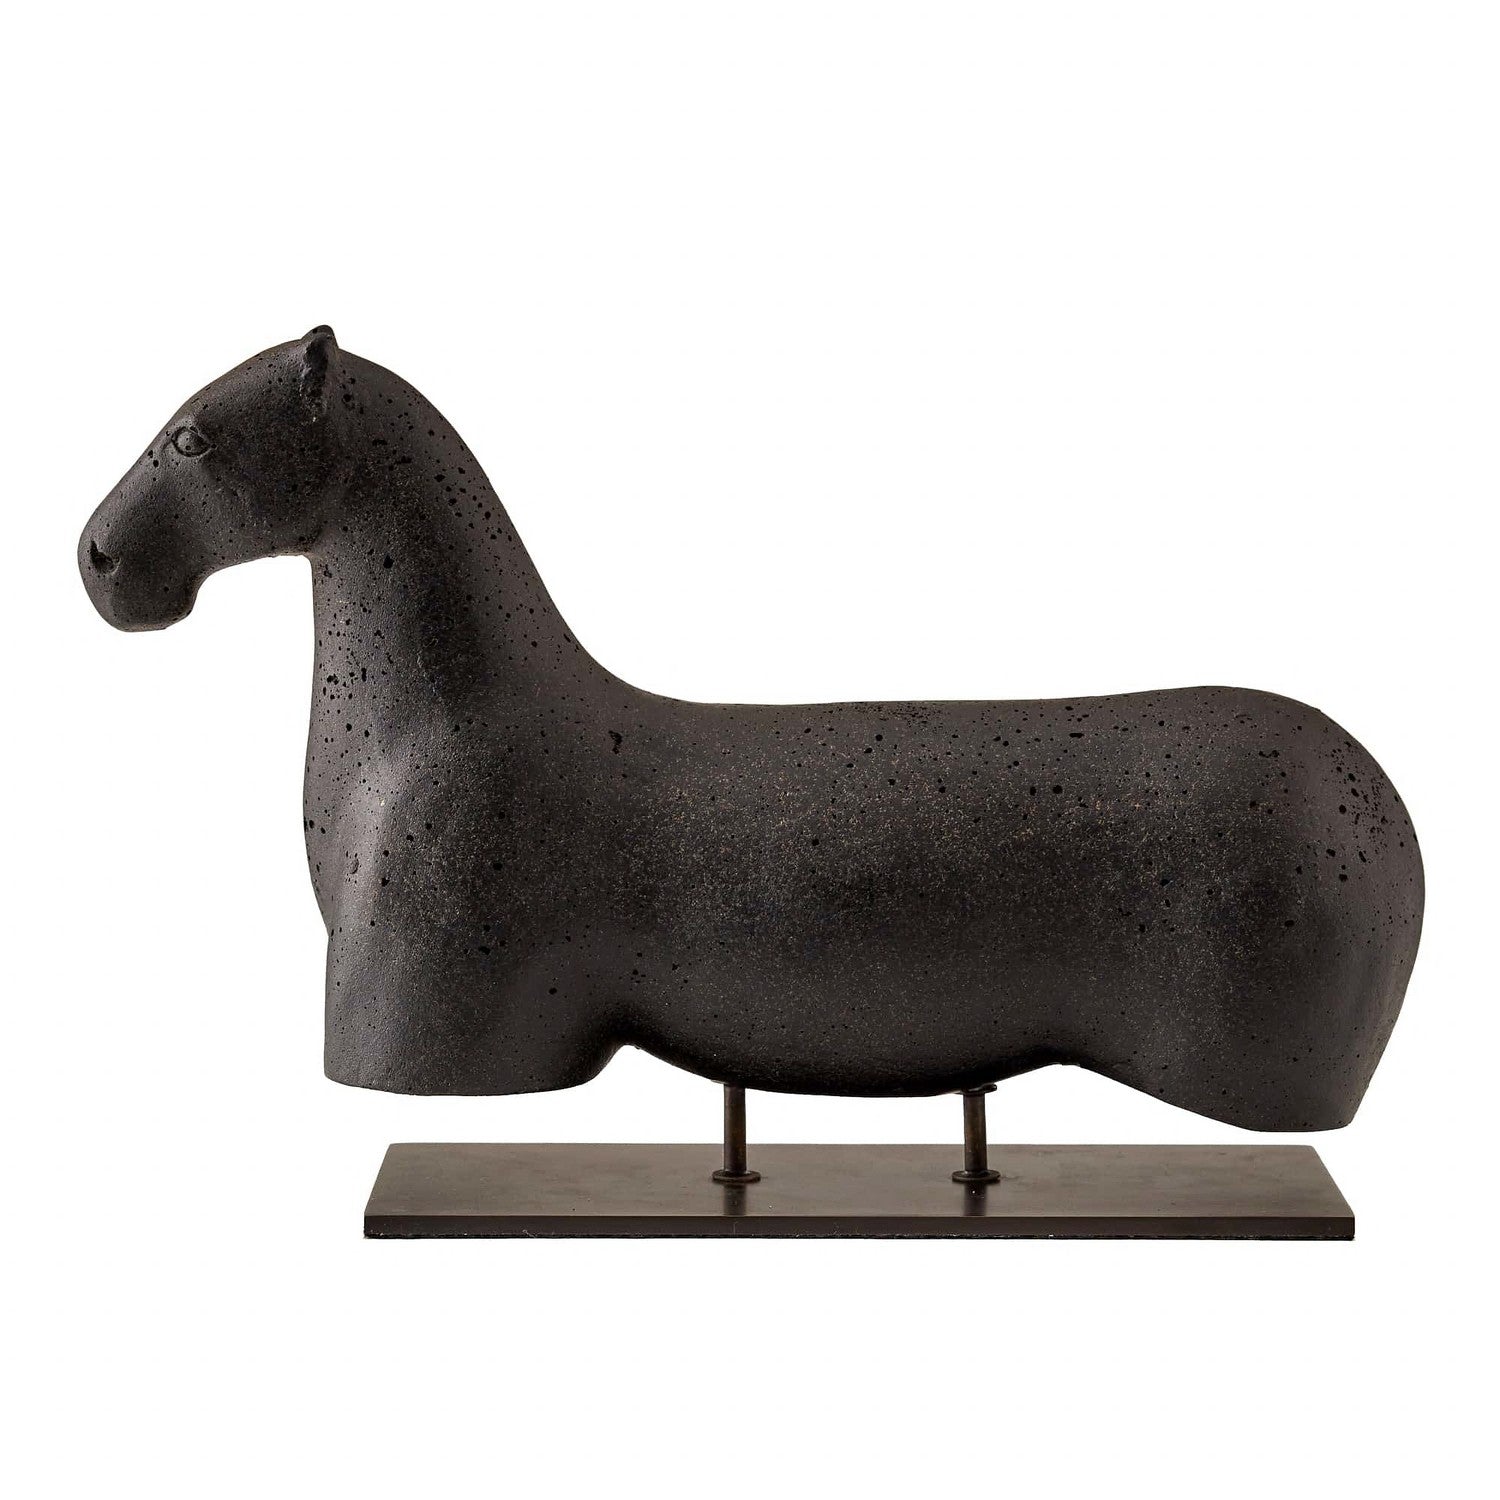 Sculpture from the Vanderlinde collection in Charcoal finish